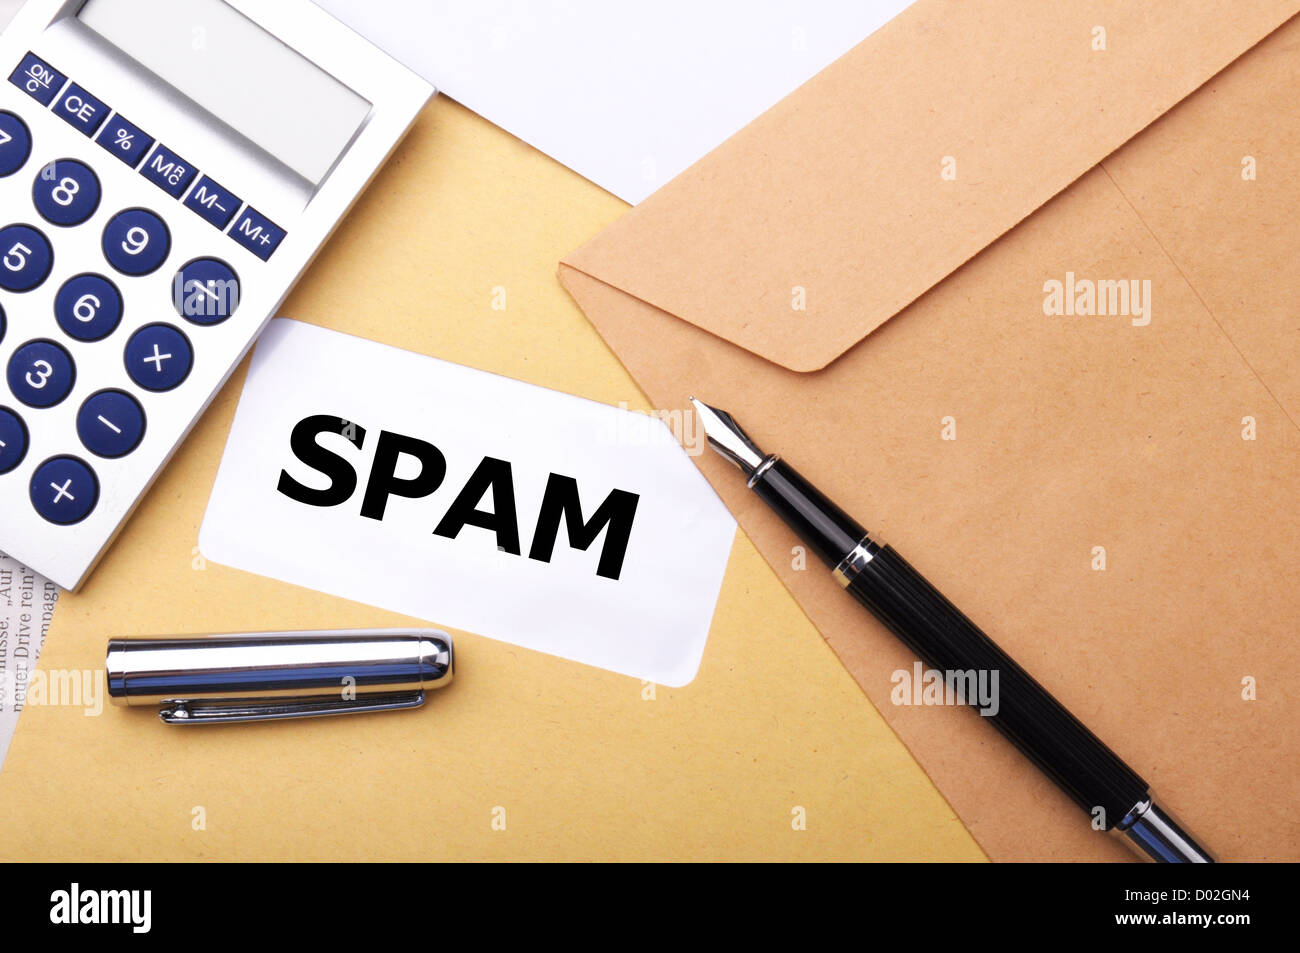 spam mail or e-mail concept with word on evelope Stock Photo